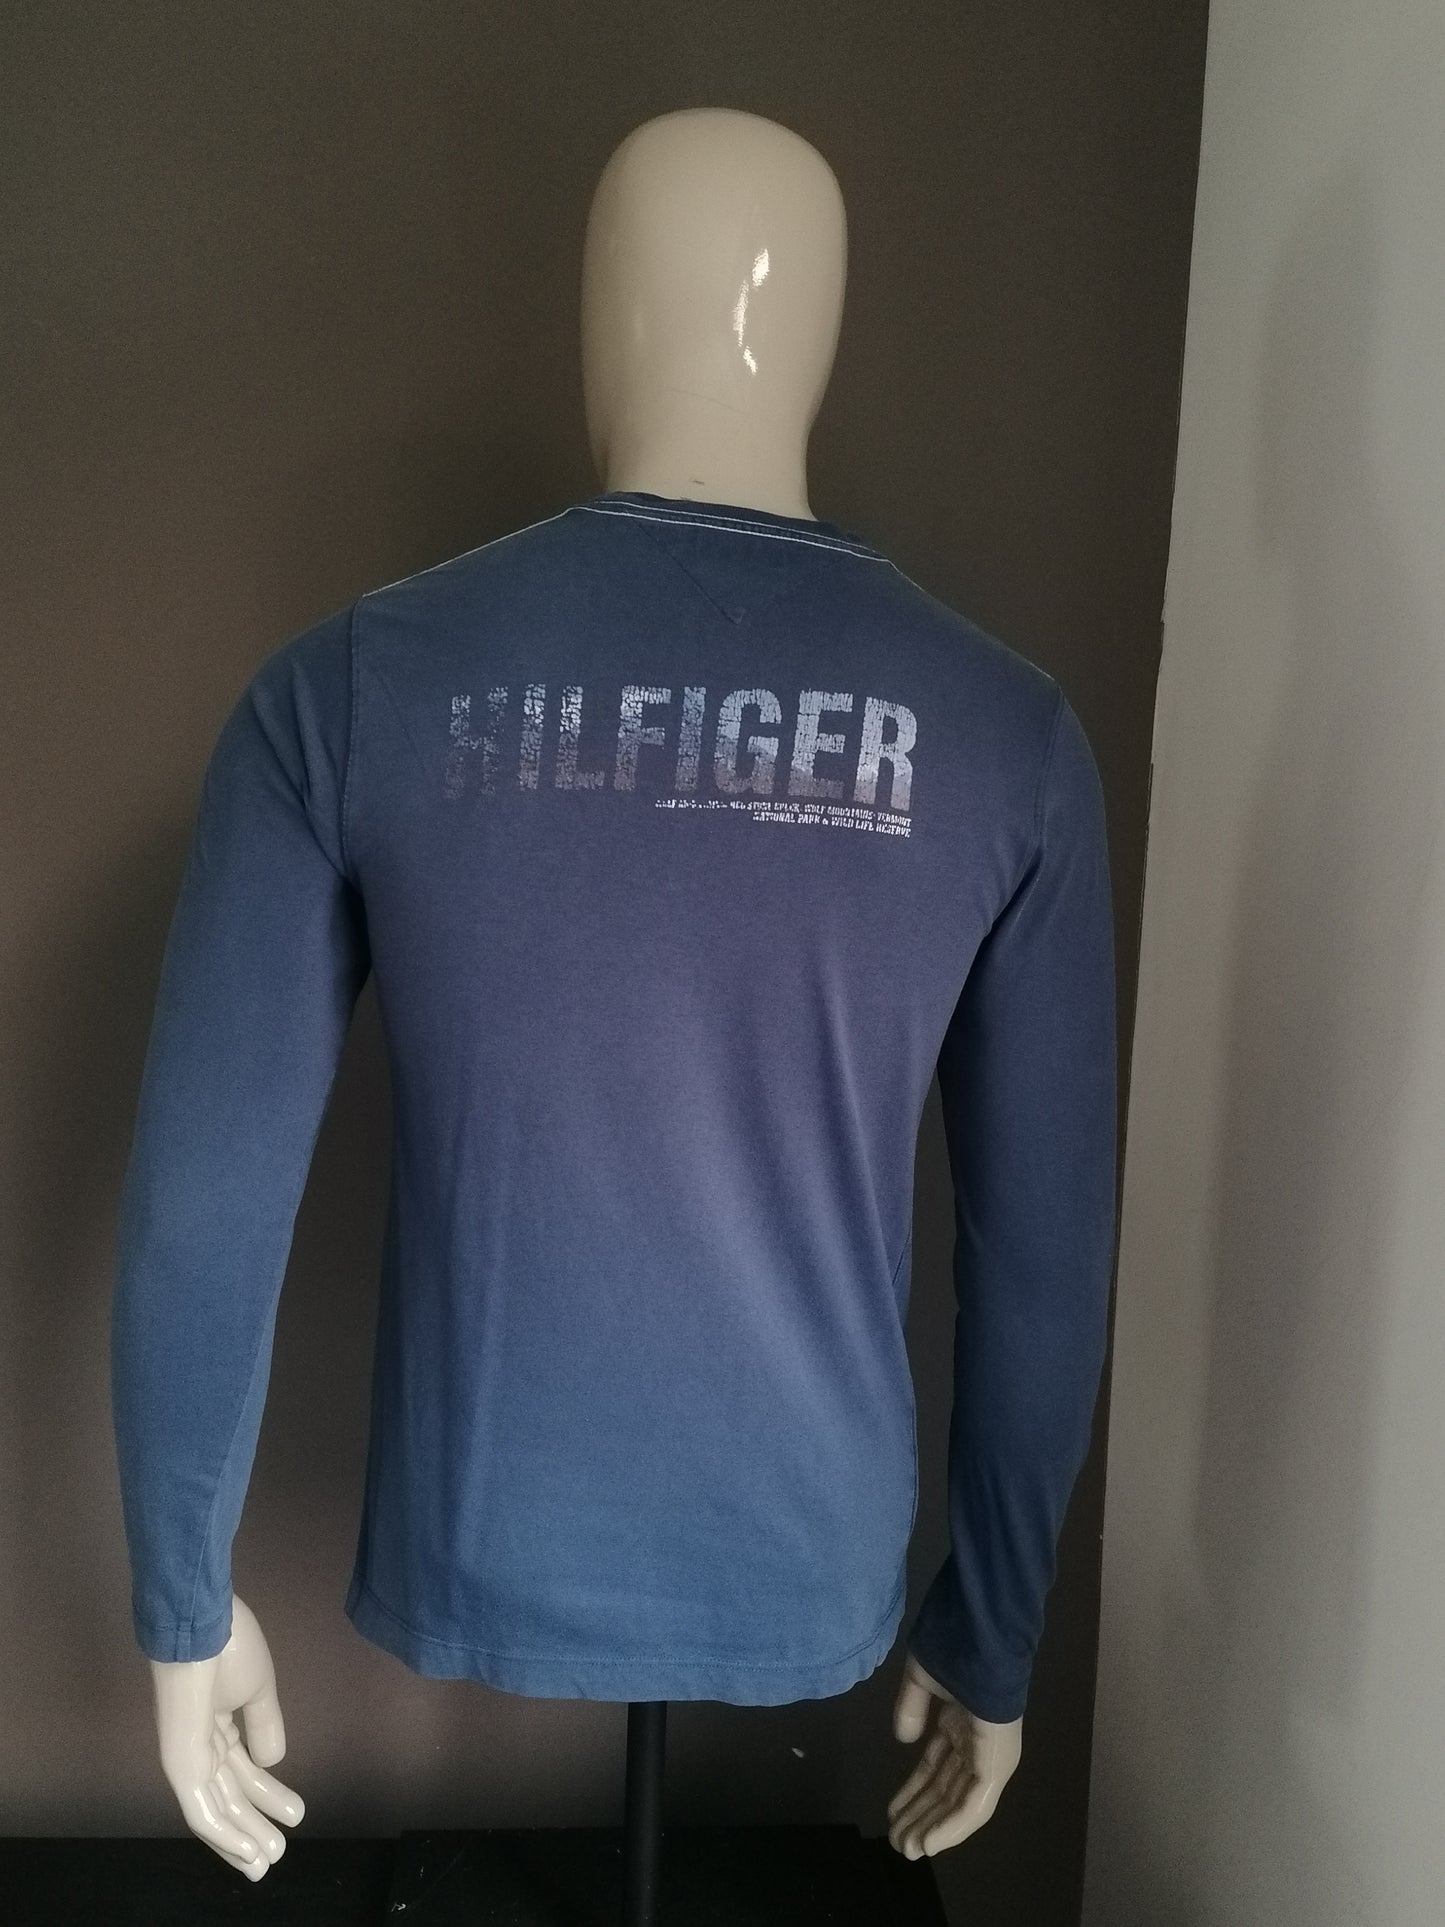 Tommy Hilfiger Longsleeve. Blue colored. Size S.